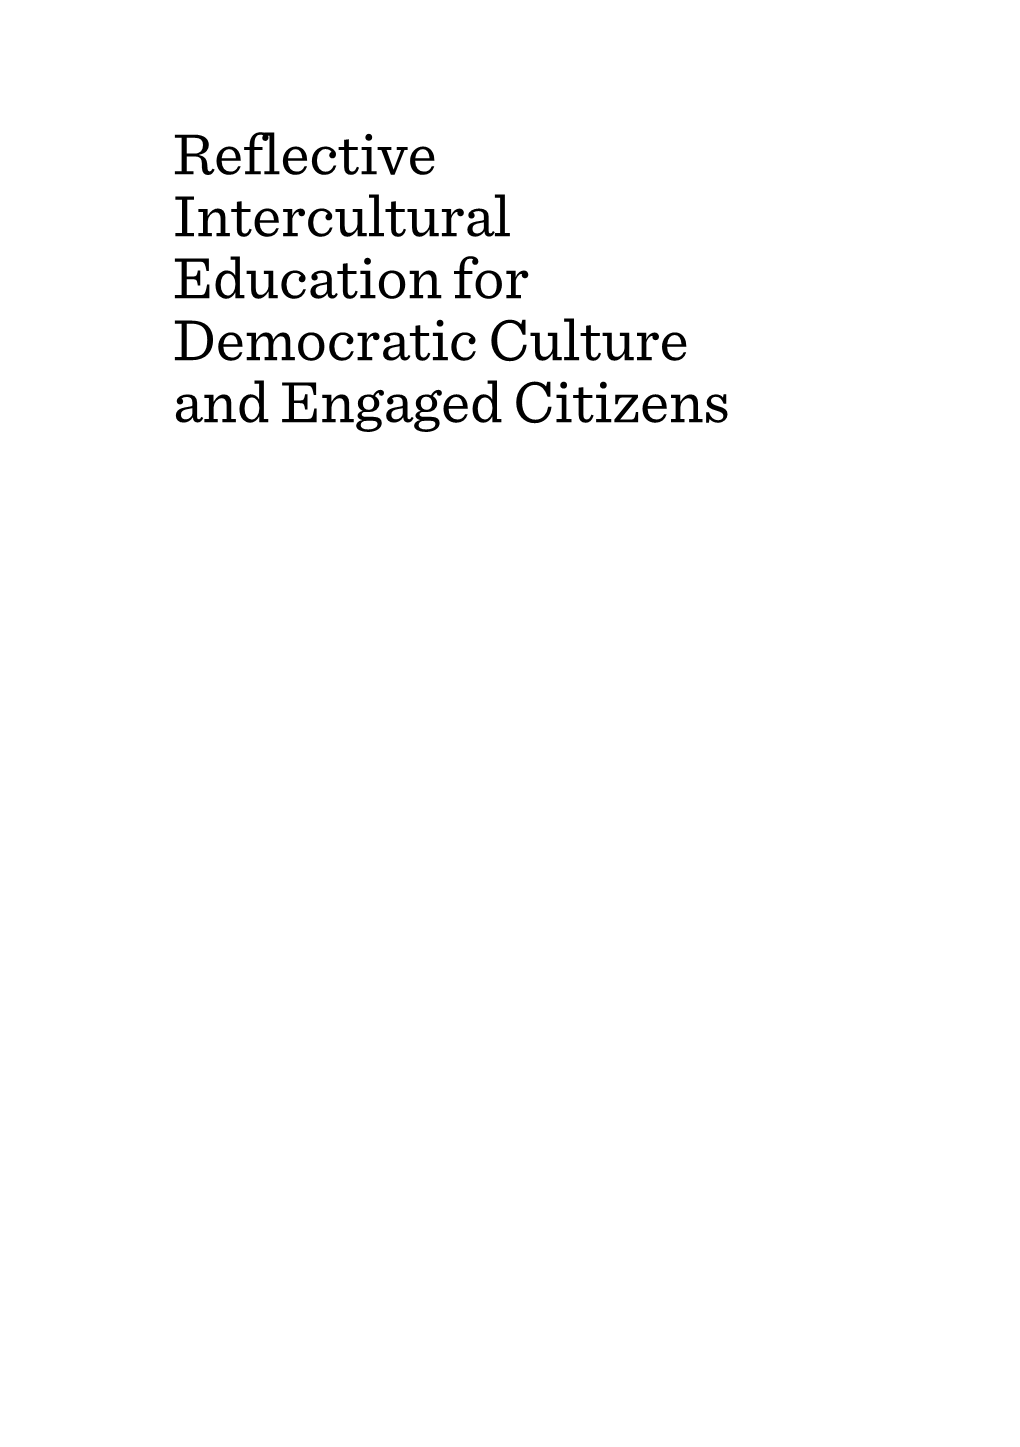 Reflective Intercultural Education for Democratic Culture and Engaged Citizens